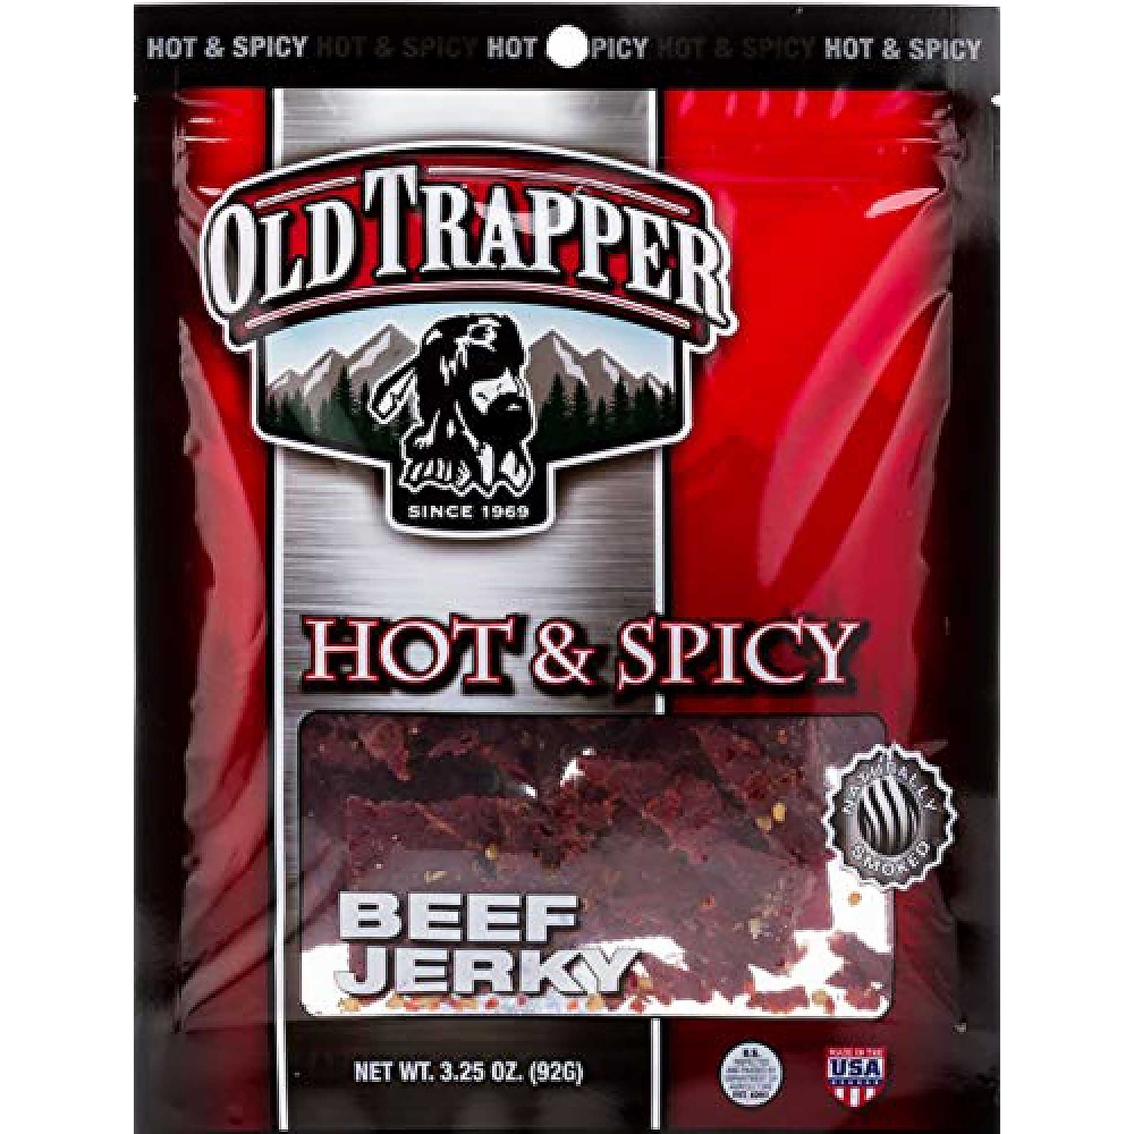 Old Trapper Spicy Jerky 3.25 oz.